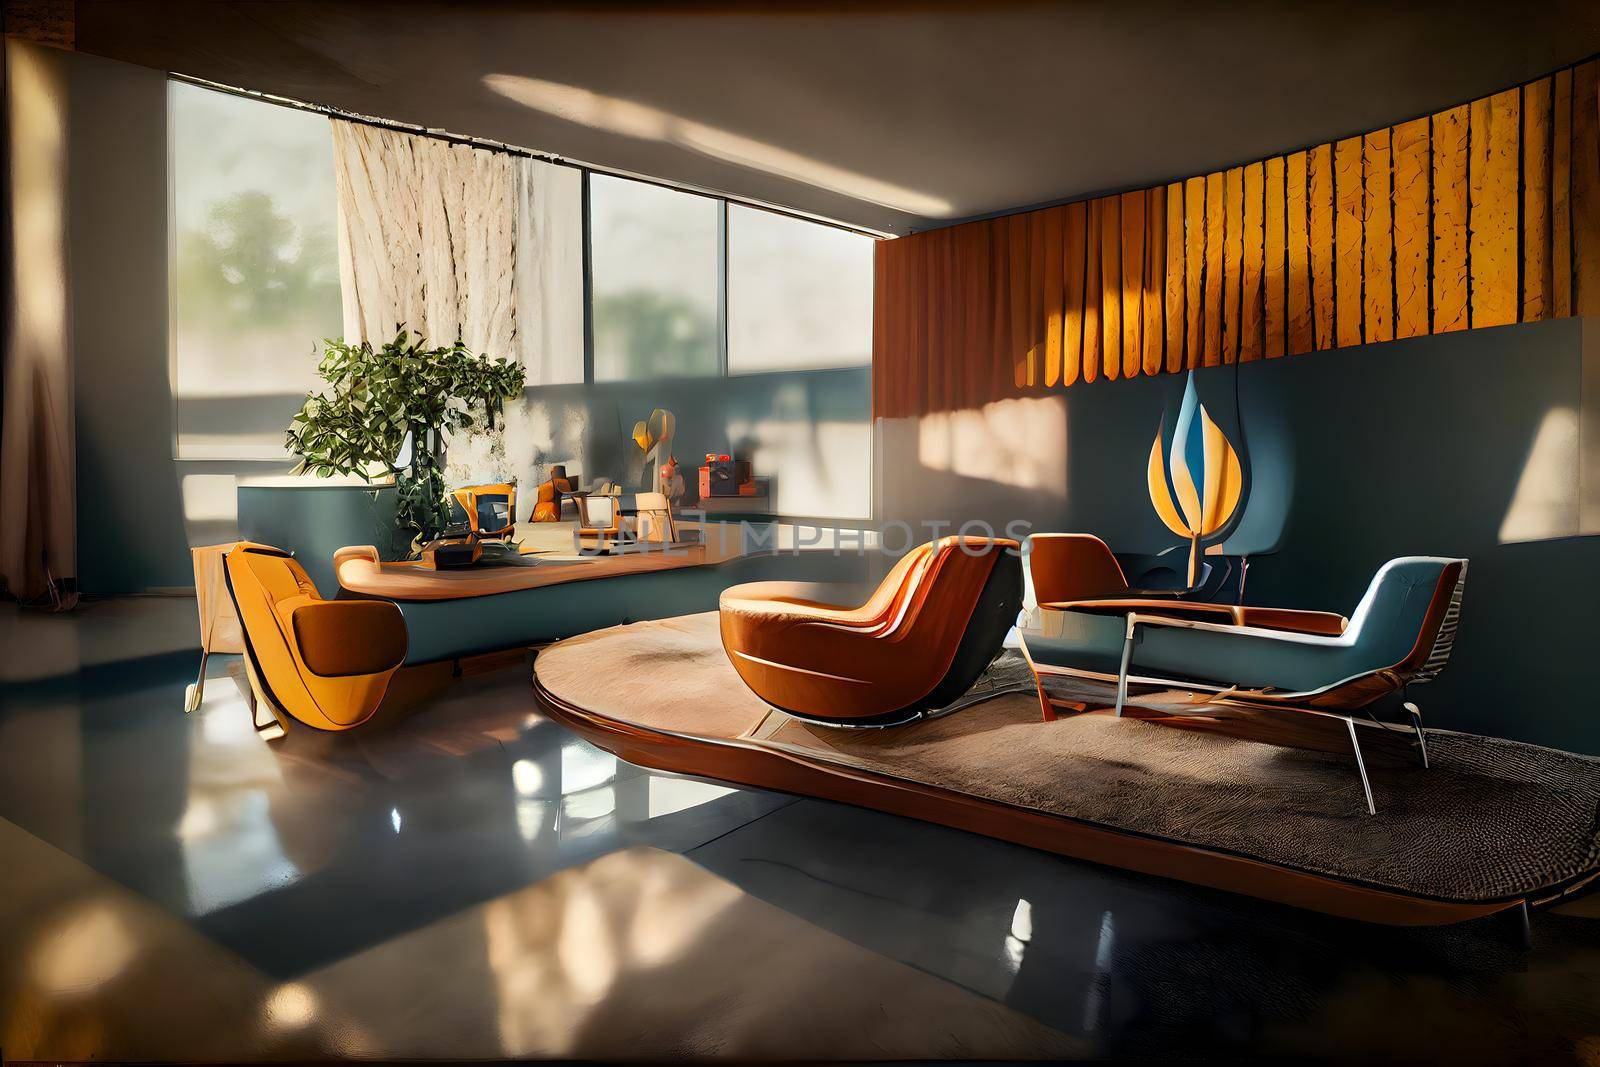 mid century modern style interior, neural network generated picture by z1b